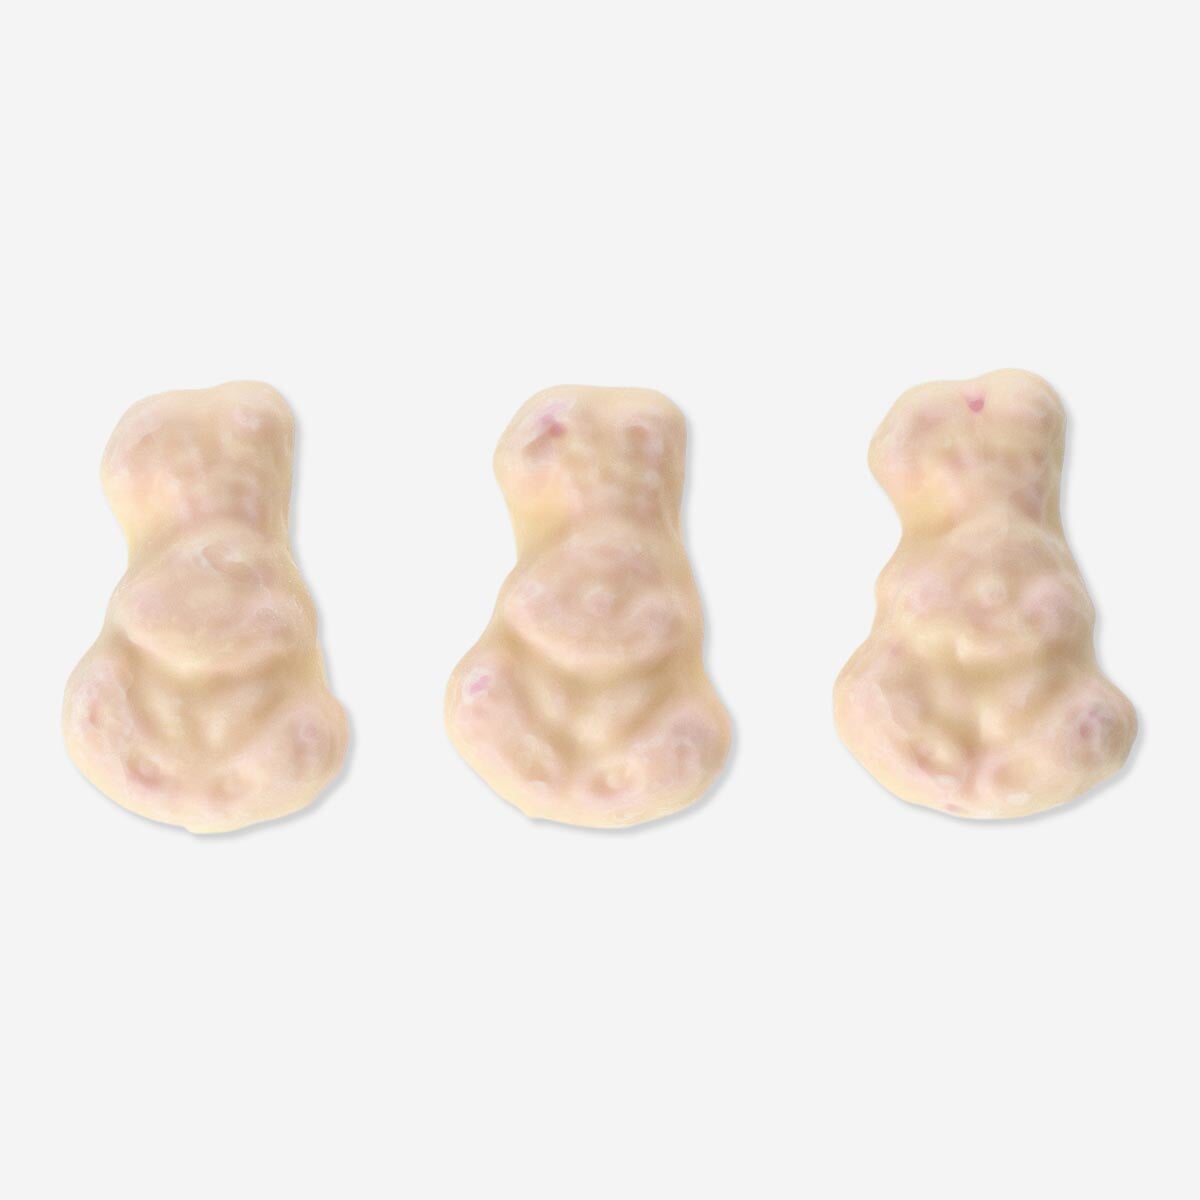 Marshmallow rabbits. White chocolate and strawberry flavour Food Flying Tiger Copenhagen 